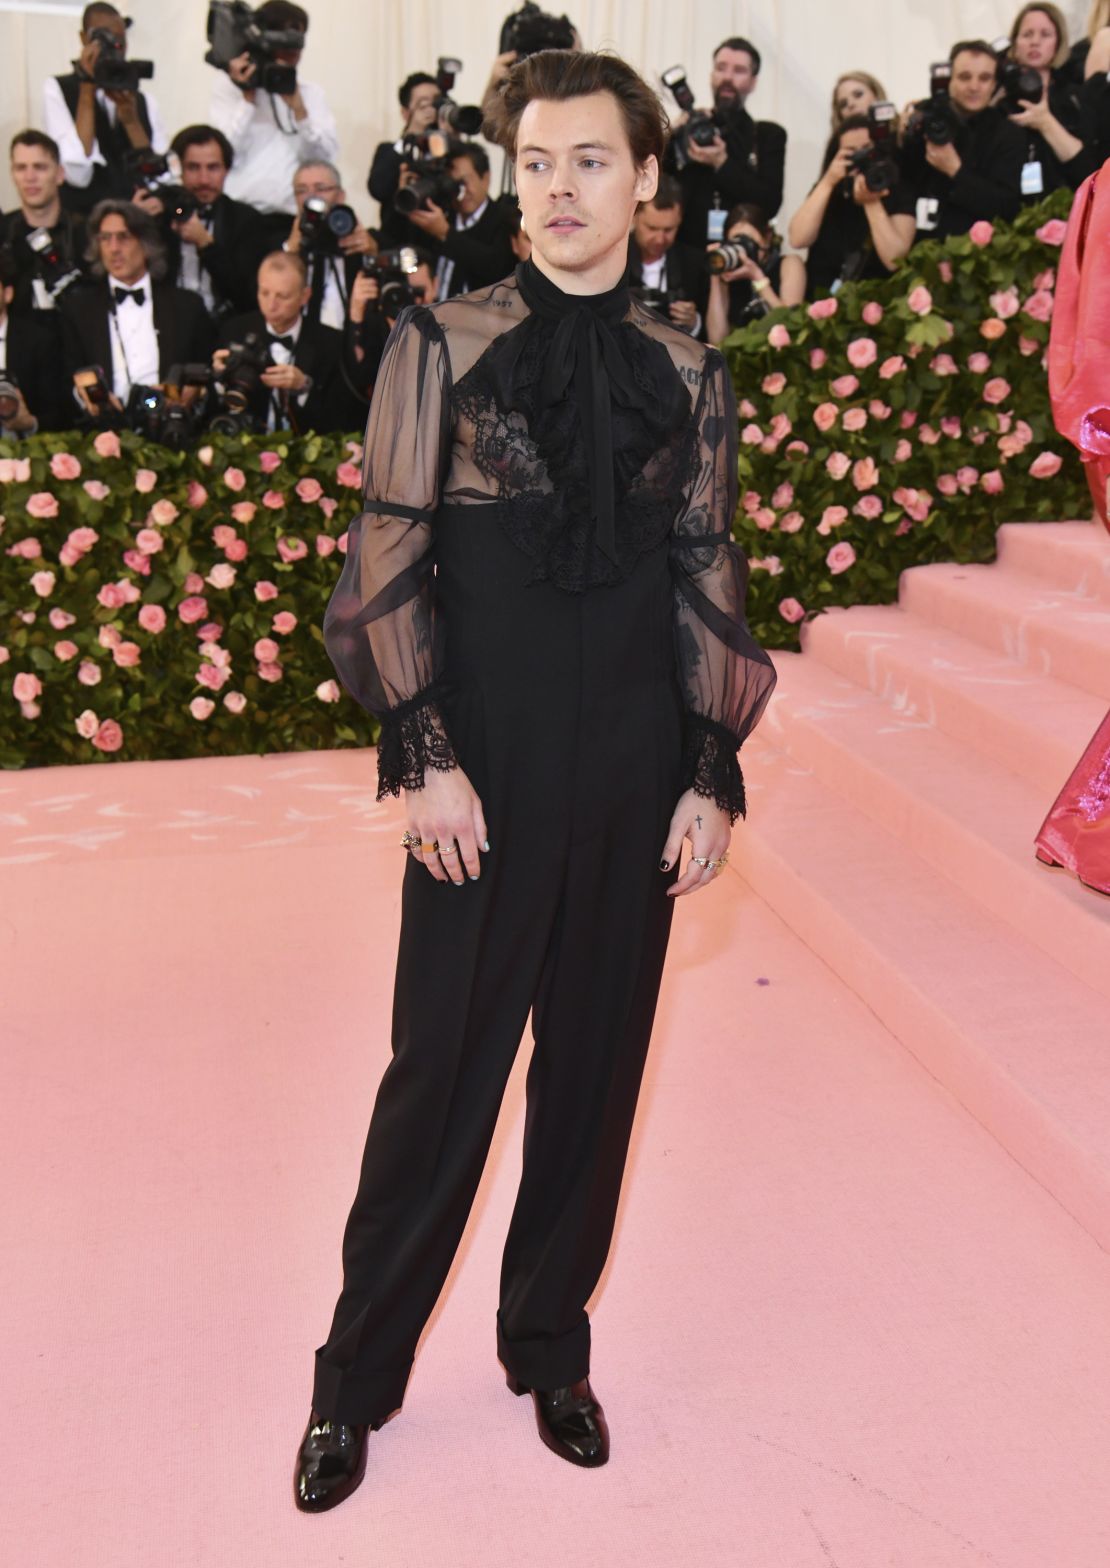 Harry Styles attends the Met Gala wearing Gucci.